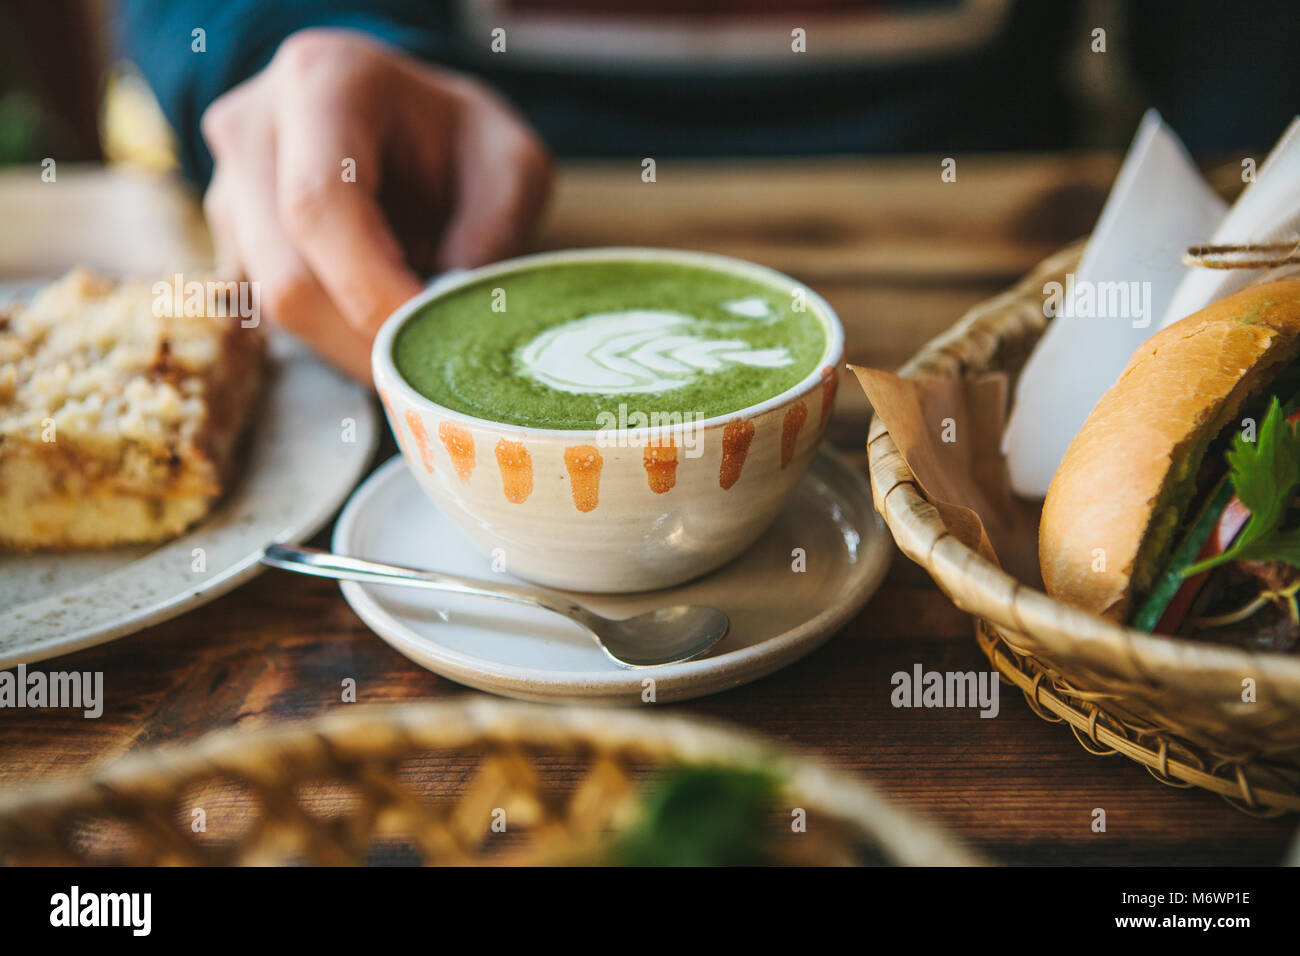 Close-up man's hand holding mug of green tea with beautiful pattern in the form of white foam next to dessert and sandwich Stock Photo